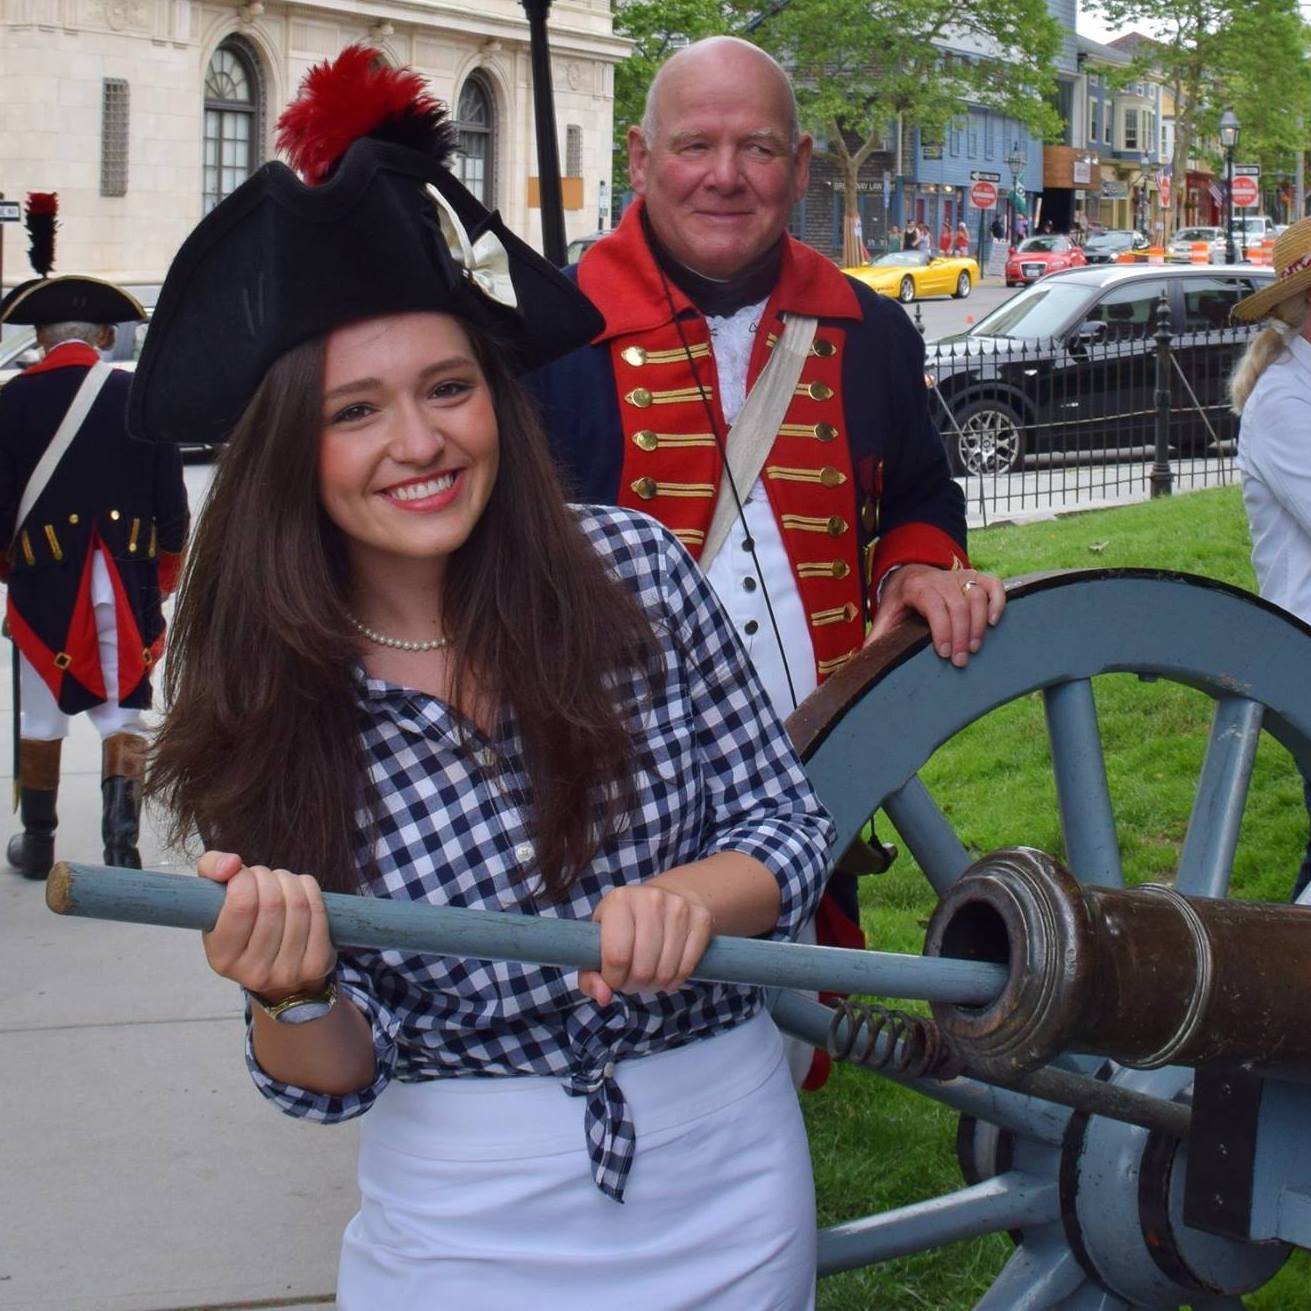 Mrs. Costley with a cannon made by Paul Revere